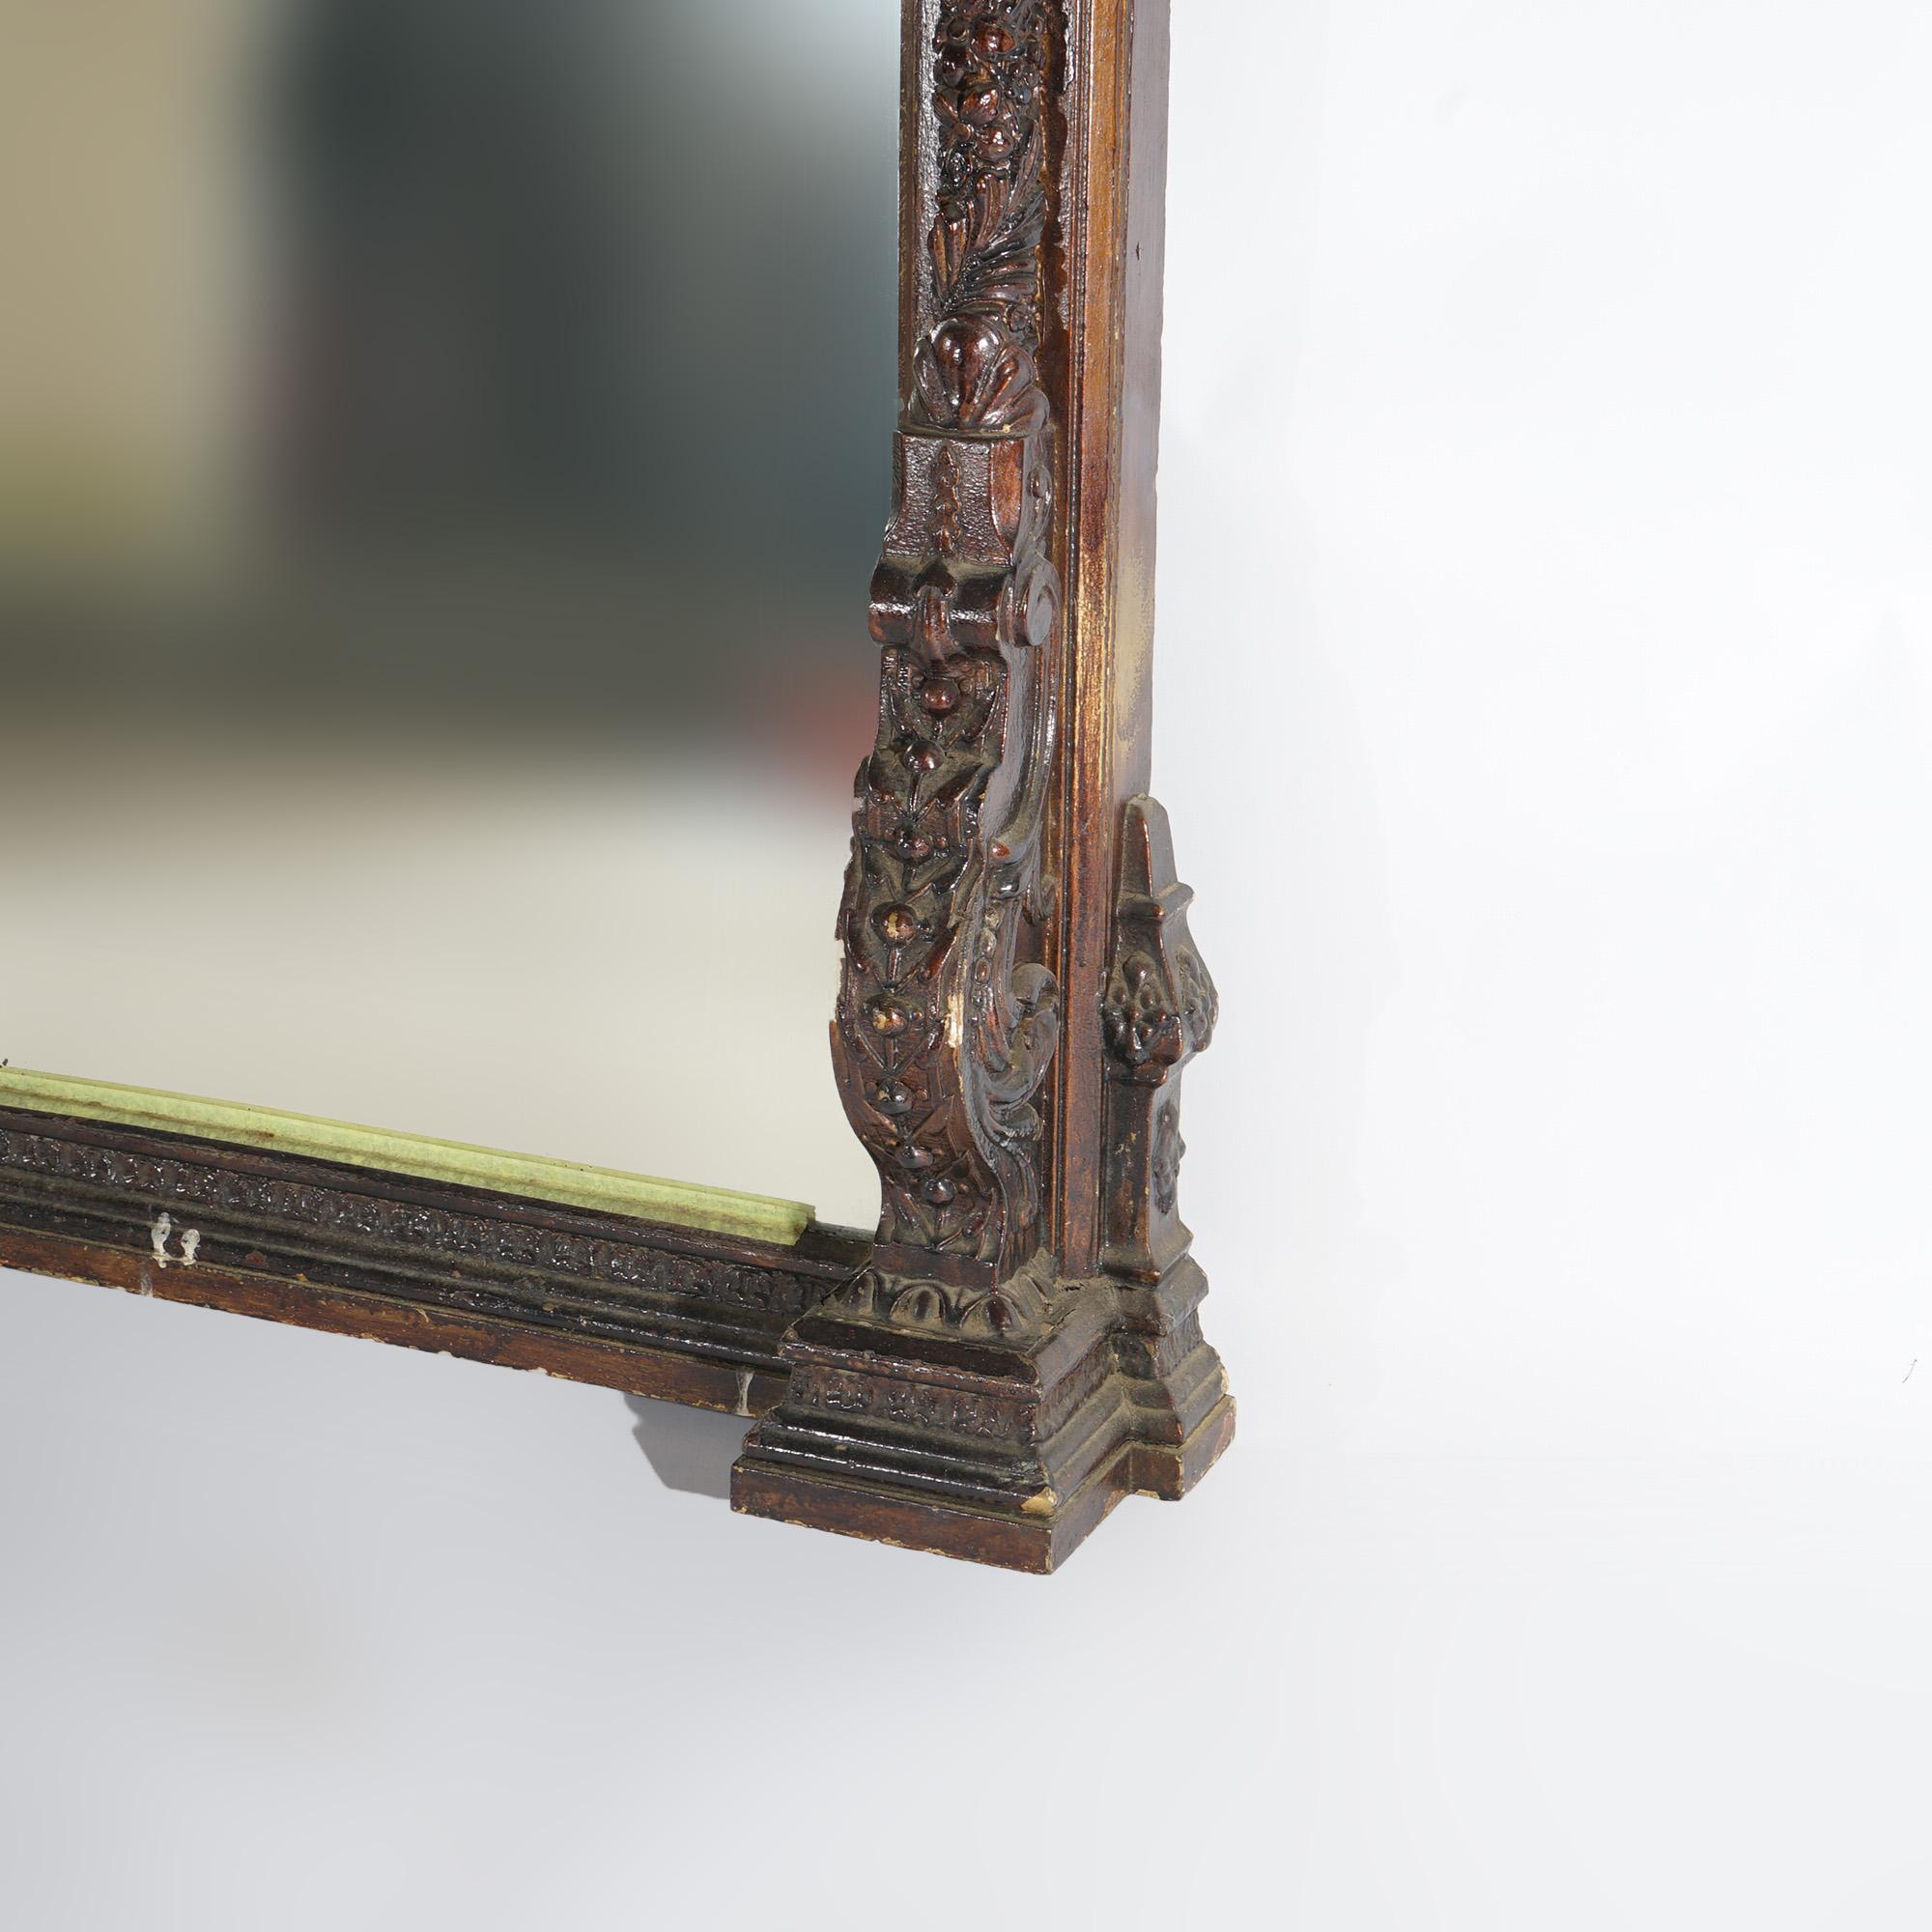 Antique Renaissance Revival Heavily Carved Wood & Gesso Over Mantle Mirror 19thC For Sale 6